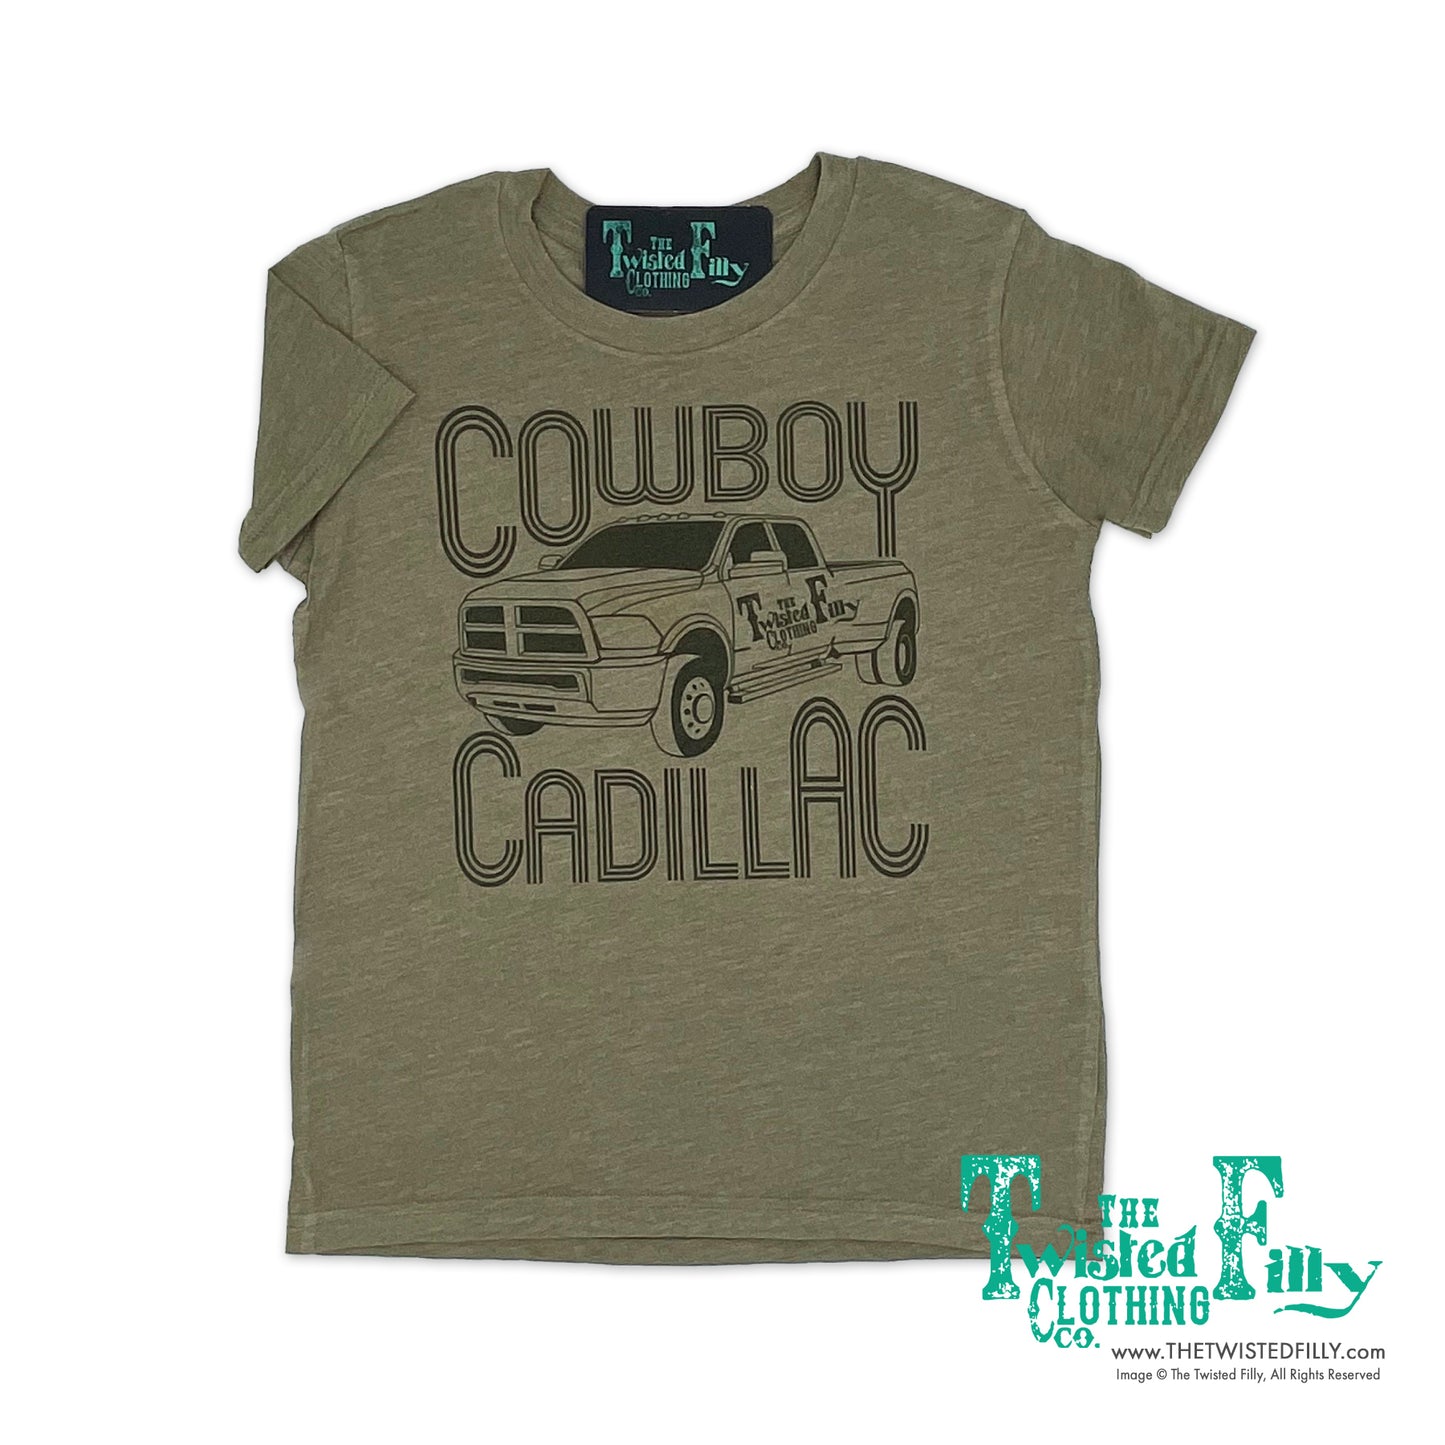 Cowboy Cadillac - S/S Infant Tee - Assorted Colors